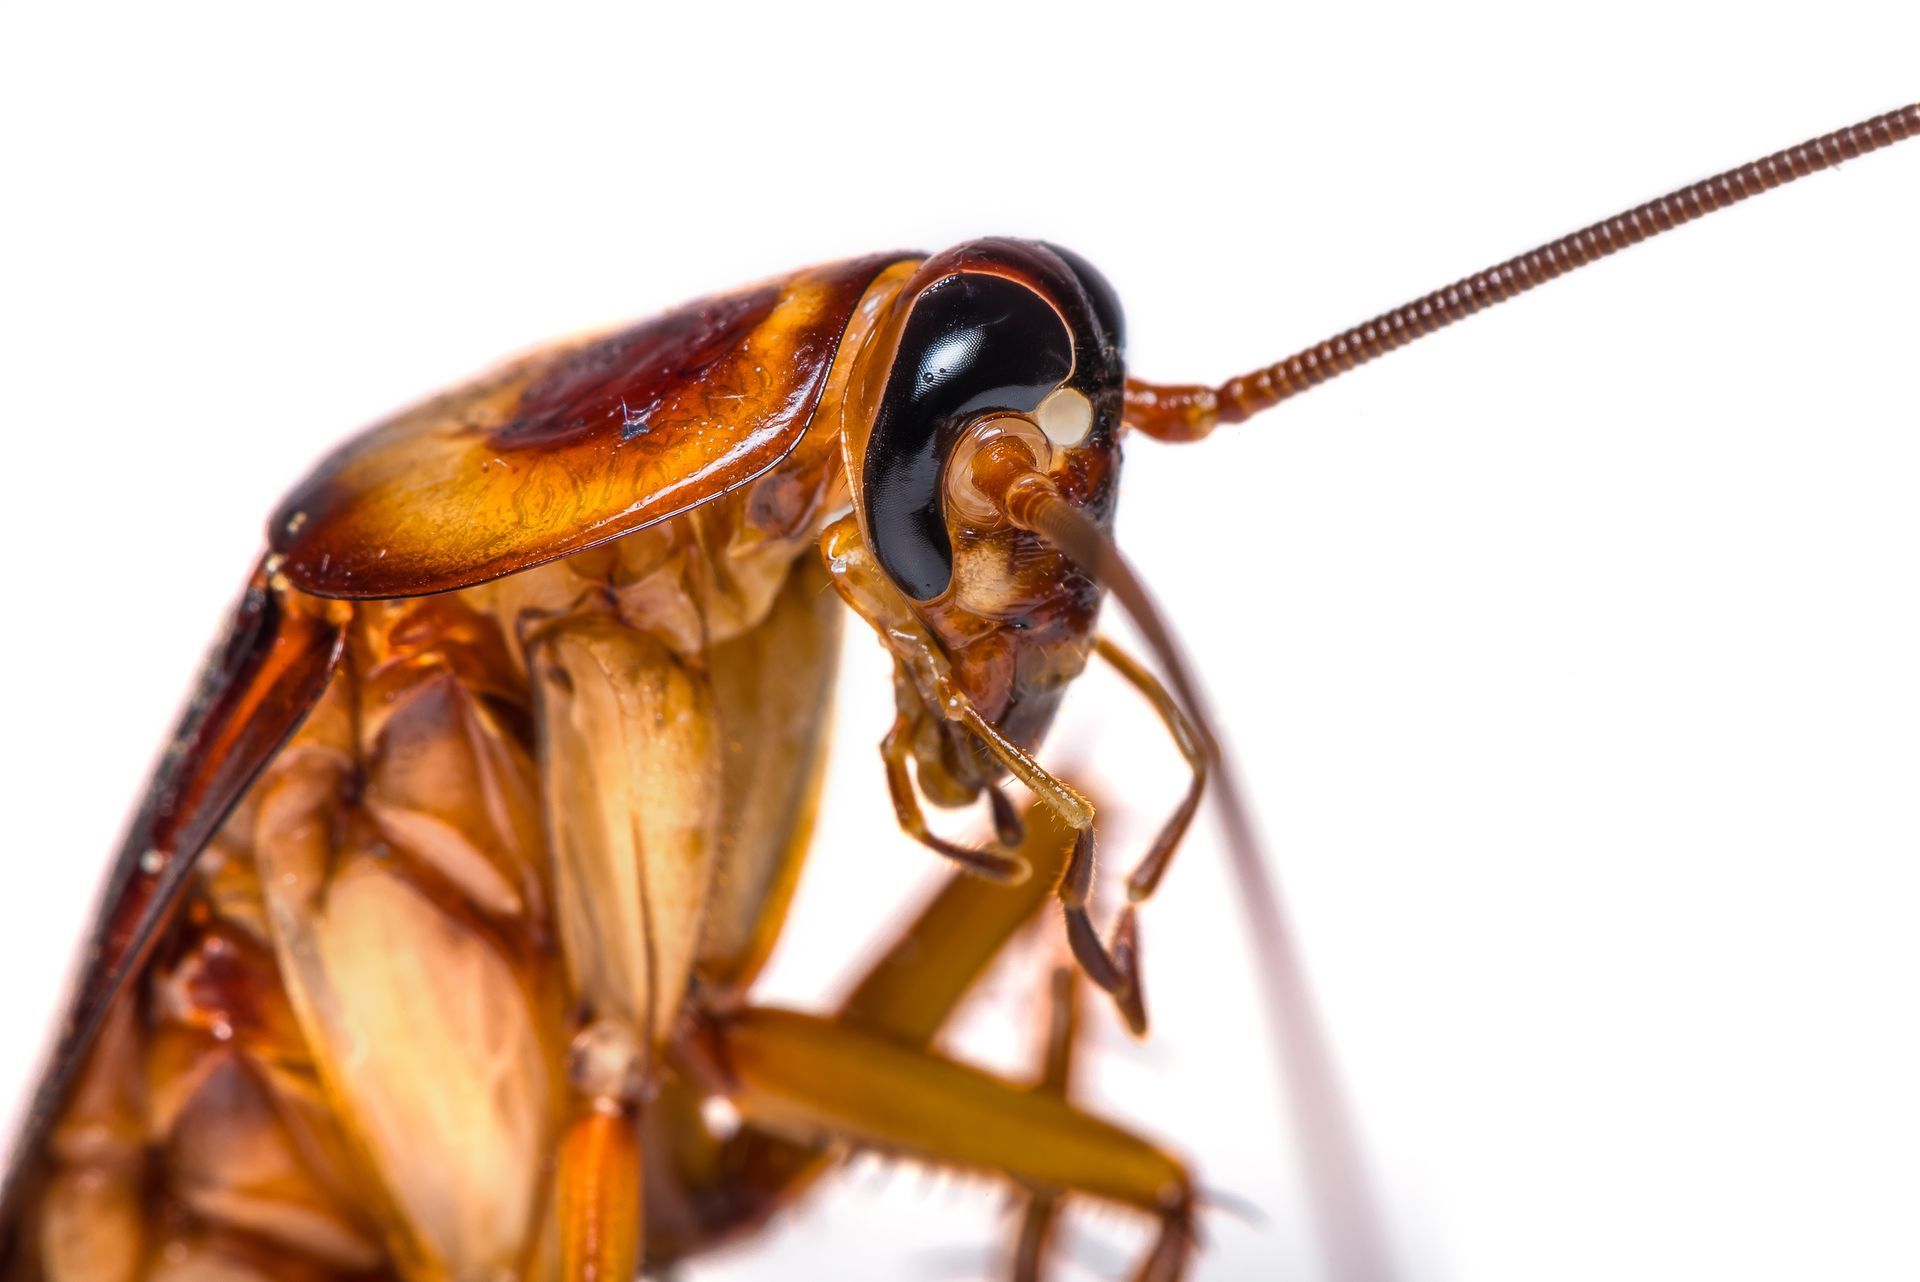 image of a cockroach mouth biting